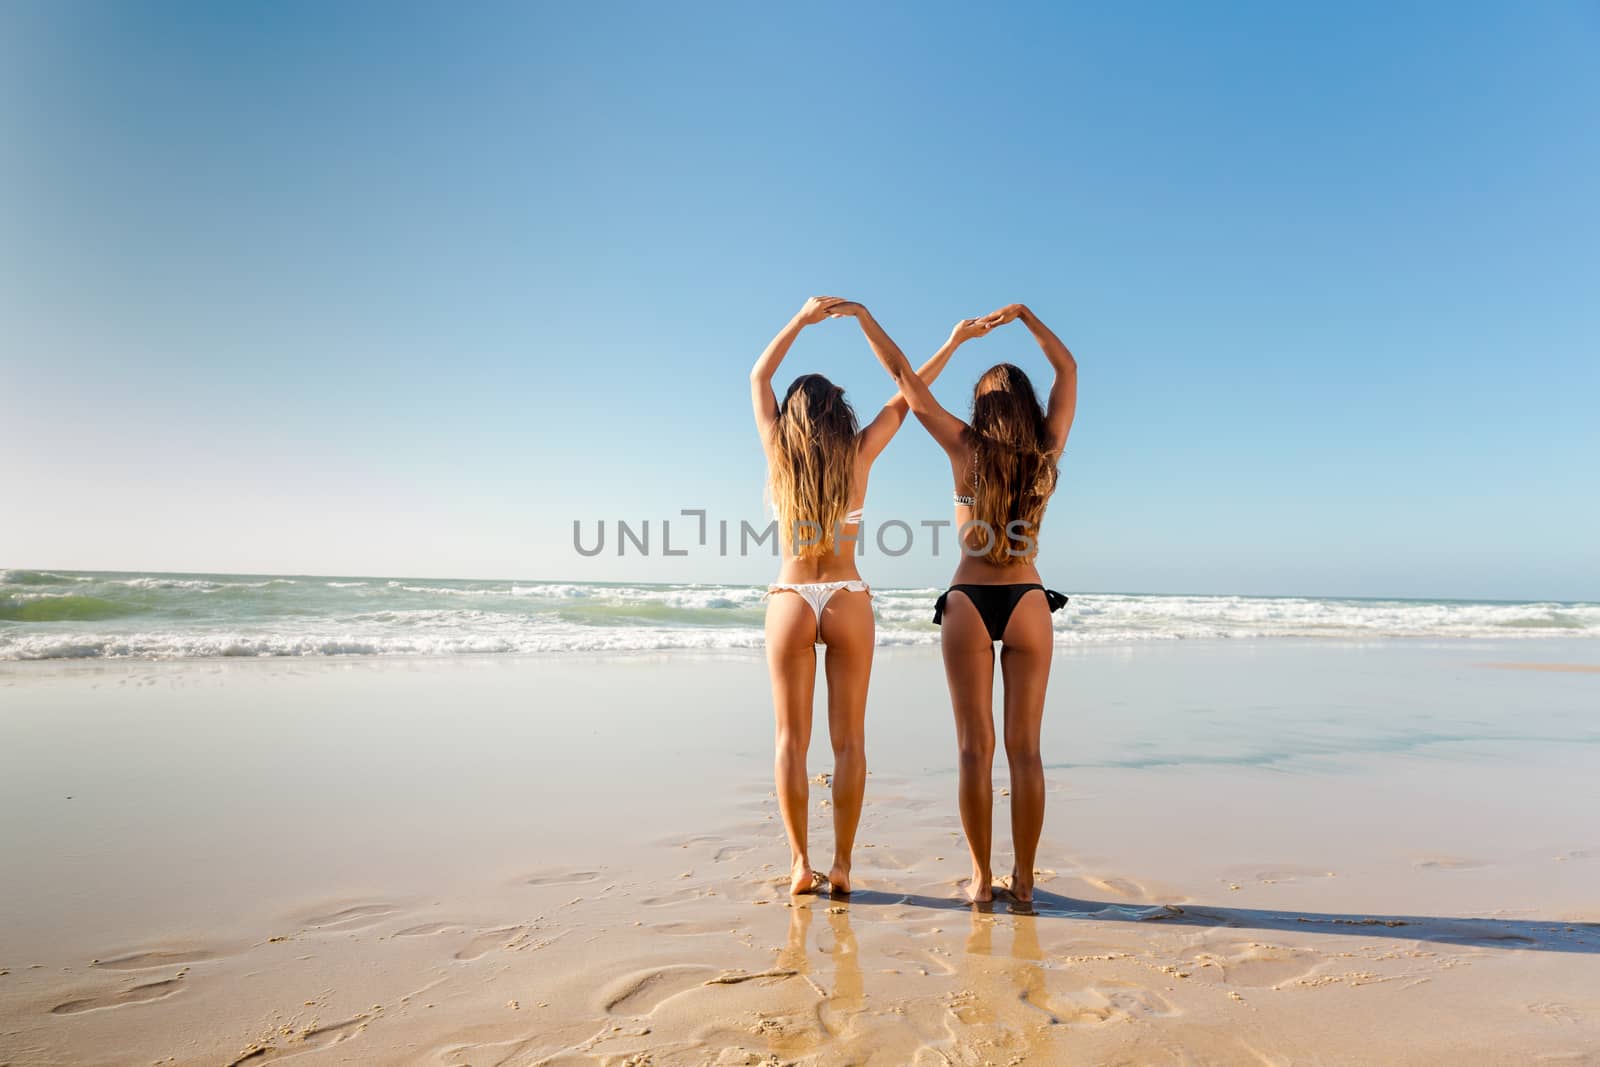 Beautiful girls in the beach giving her hands together